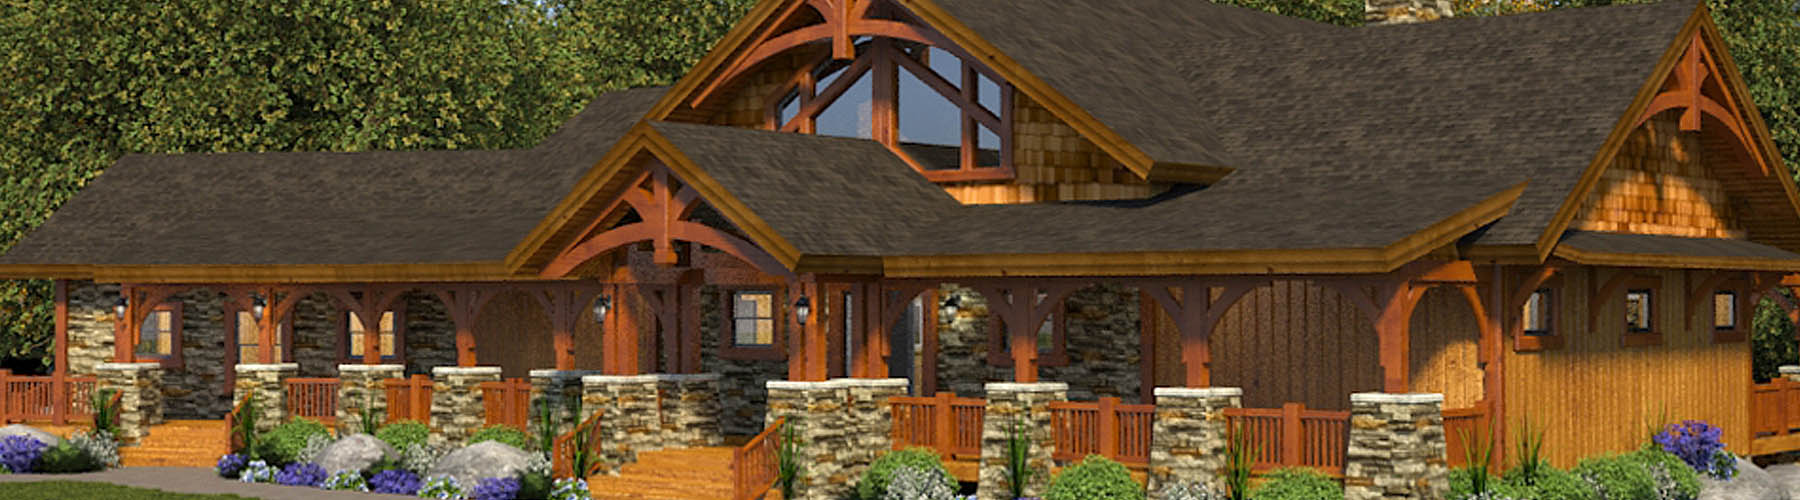 Epic Timber Ranch 2328AL-UCT Lofted Ultra Custom Timber